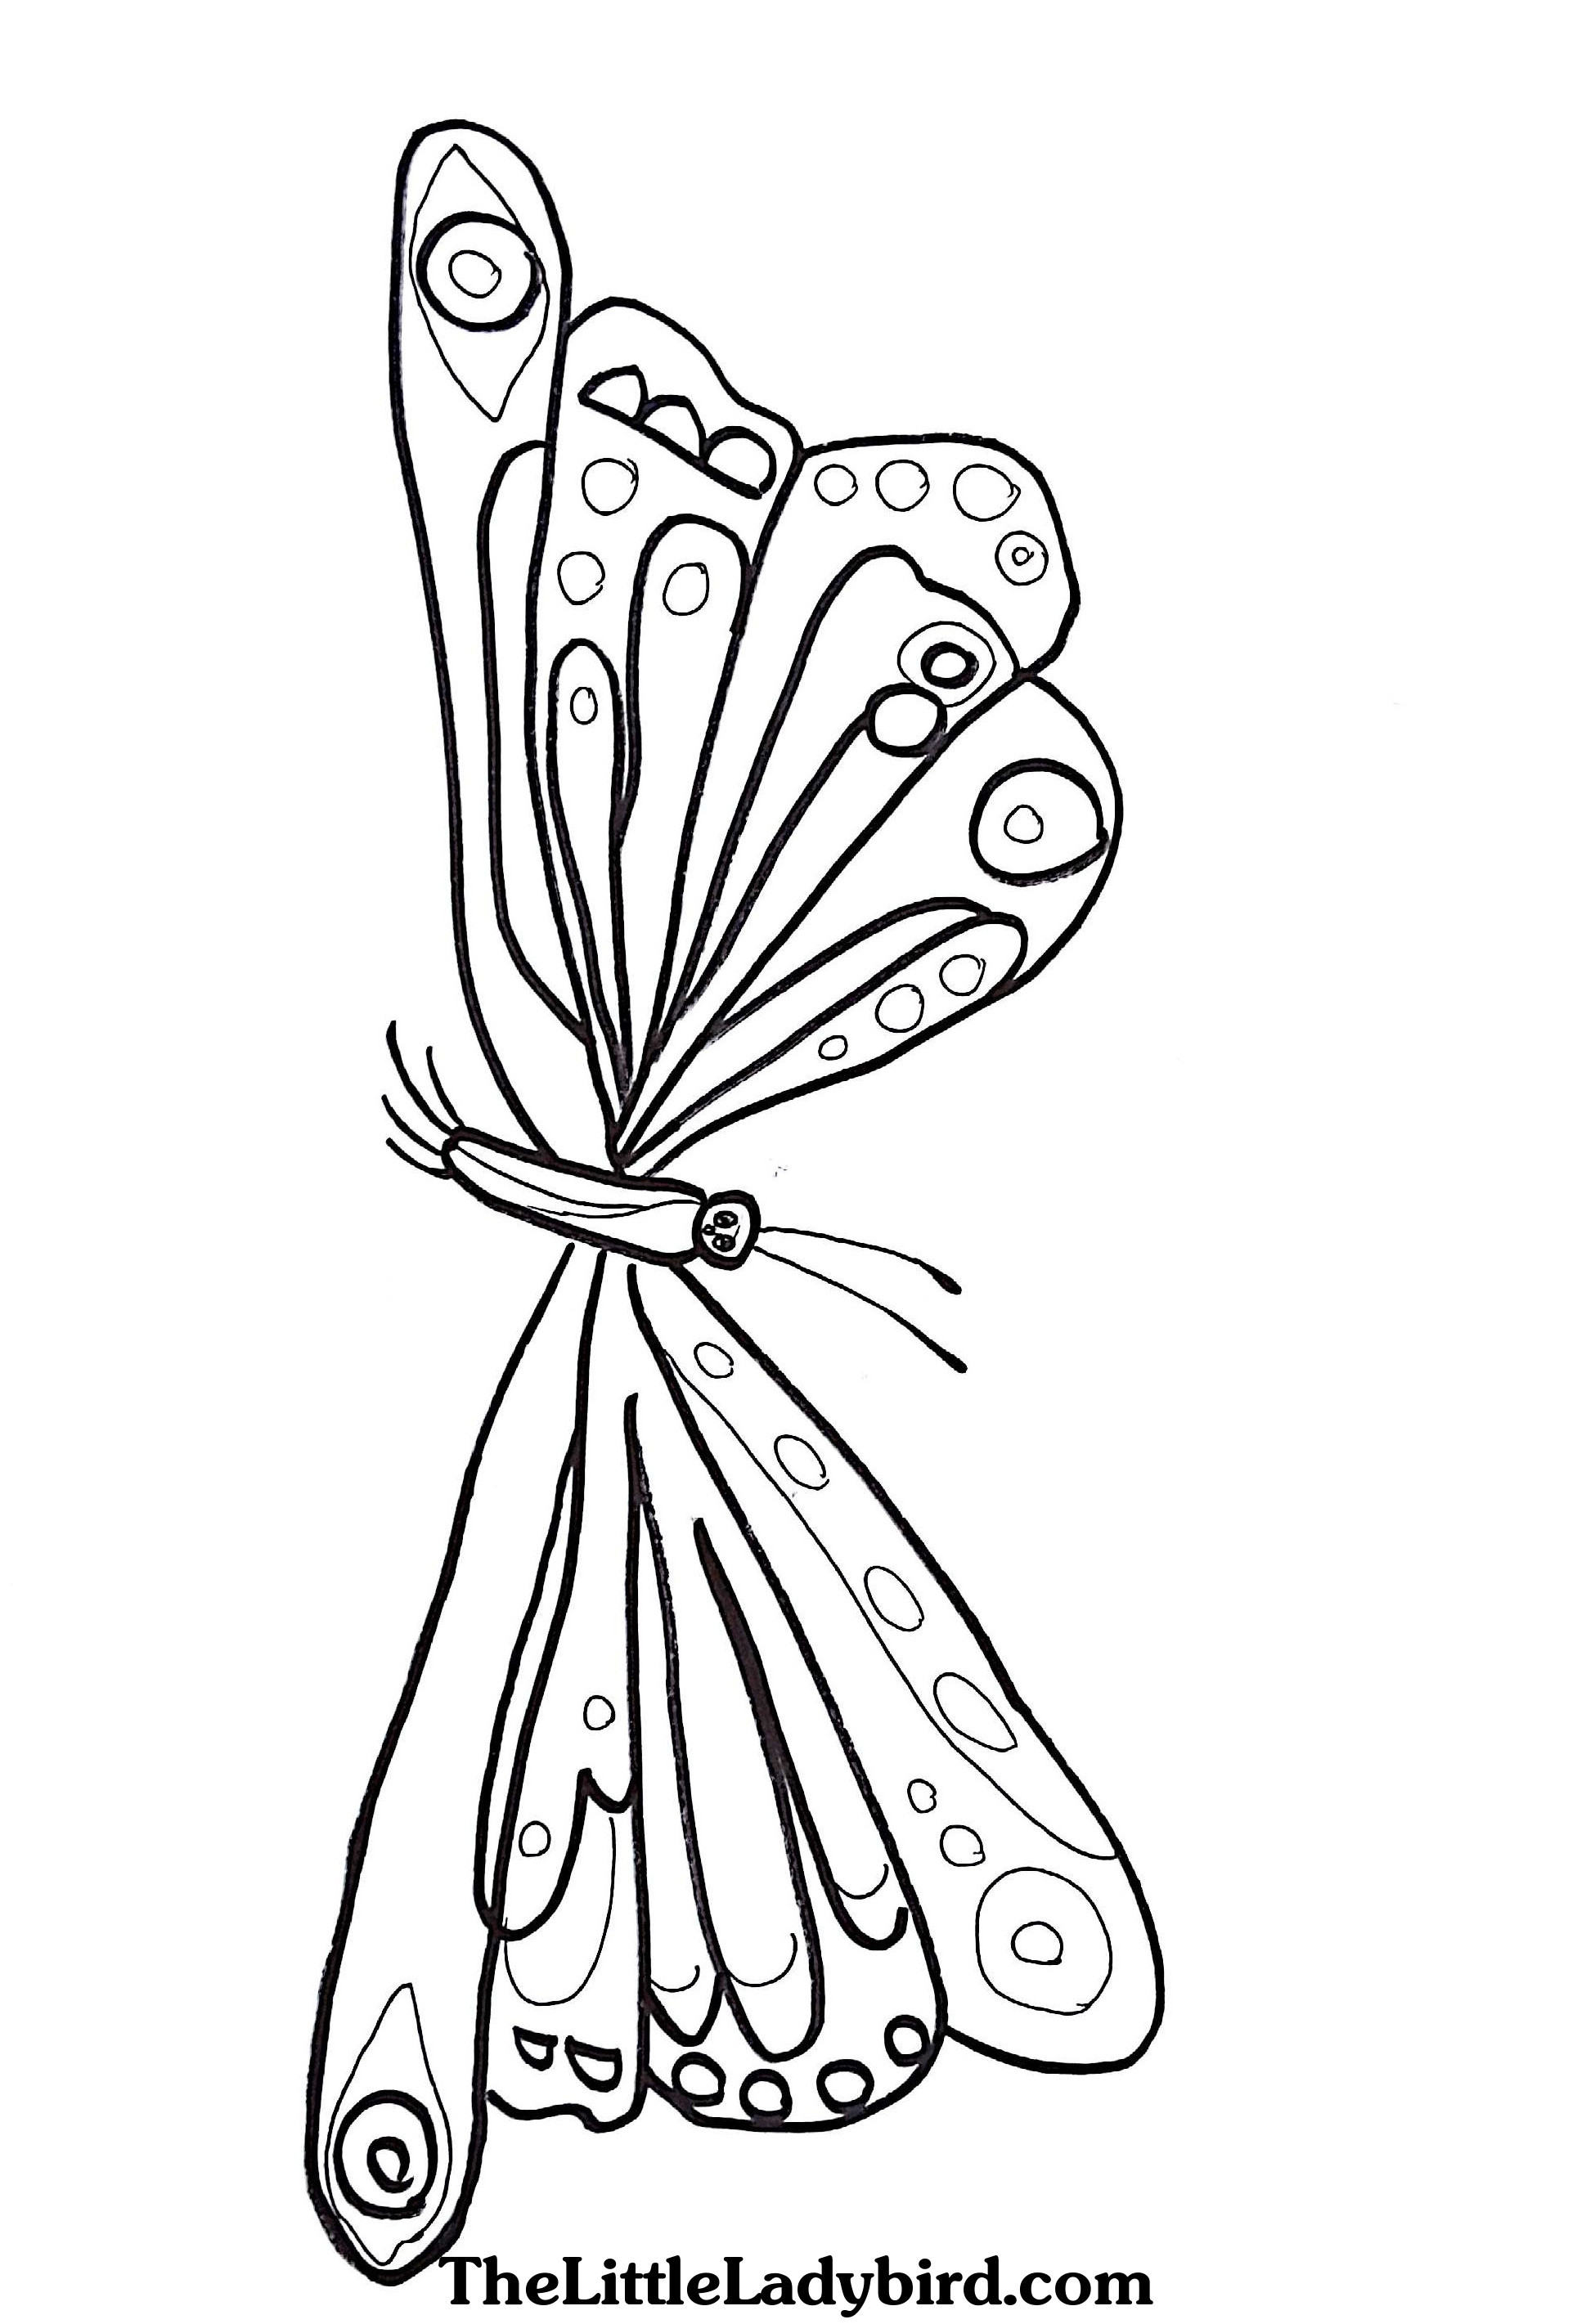 25-awesome-picture-of-hungry-caterpillar-coloring-pages-entitlementtrap